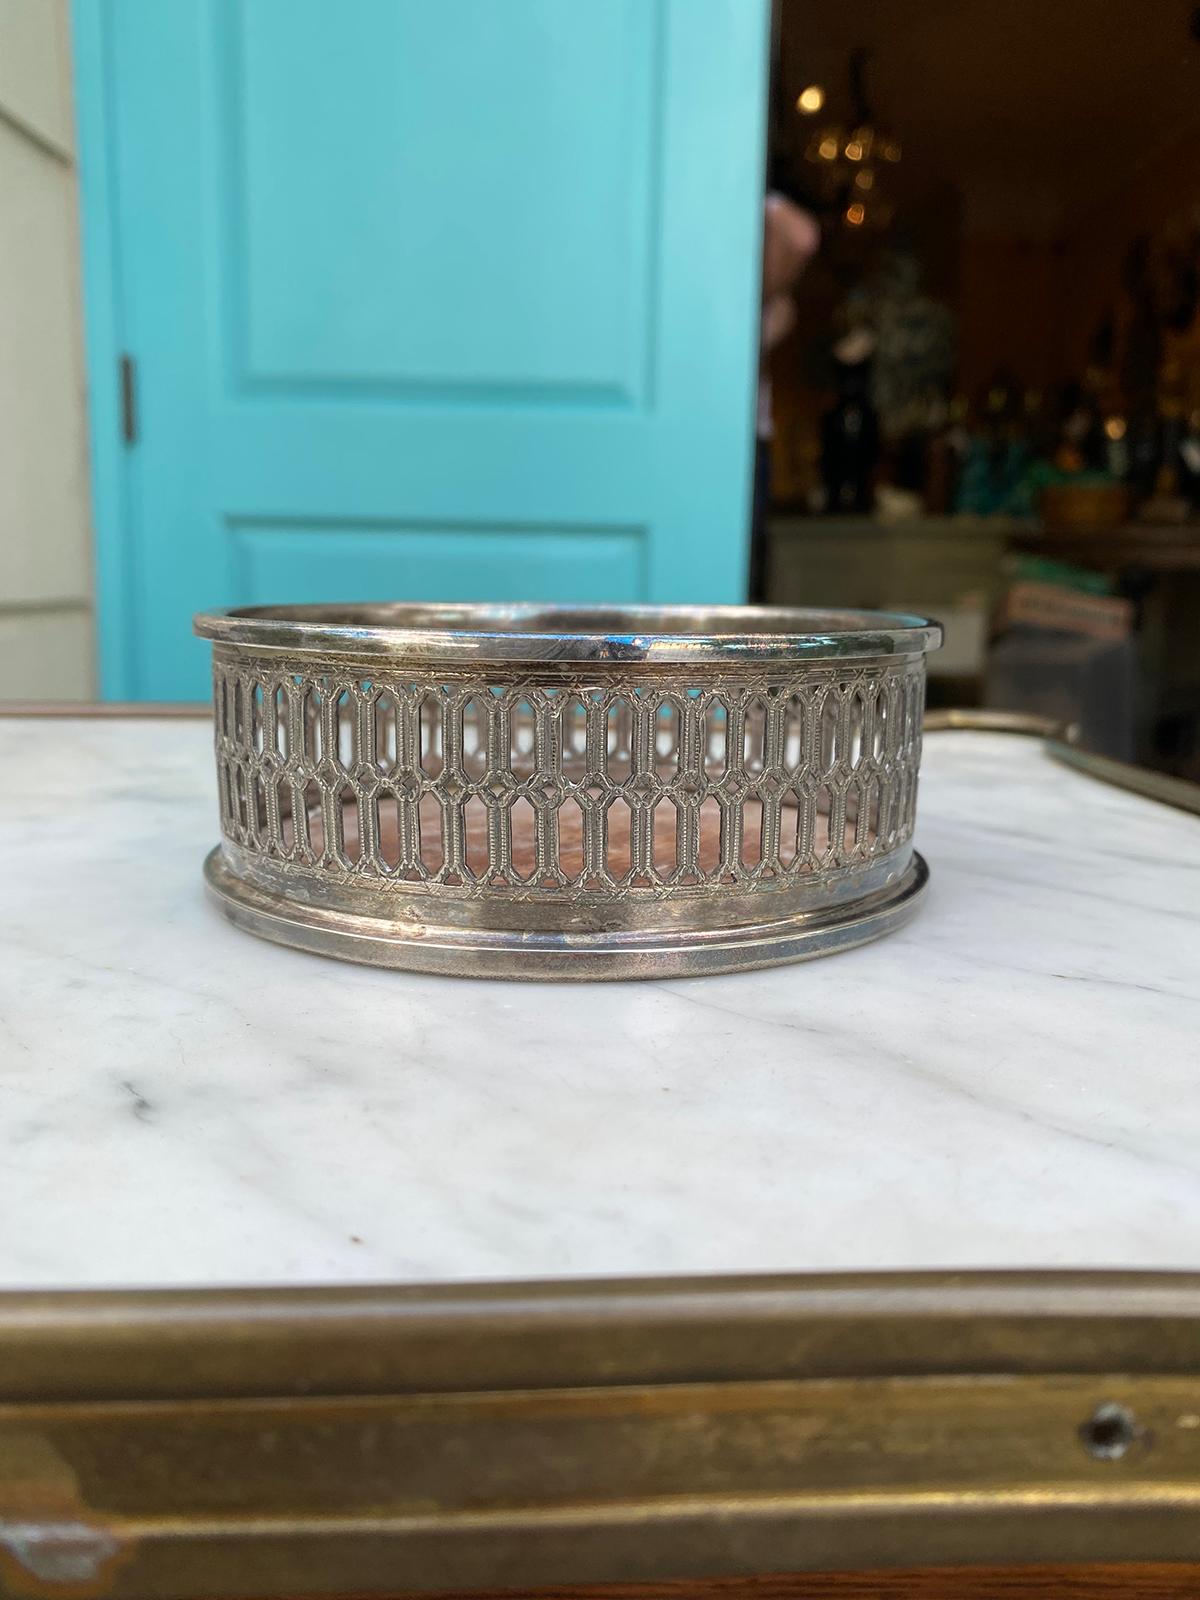 19th-20th century silvered wine coaster with wood bottom, unmarked.